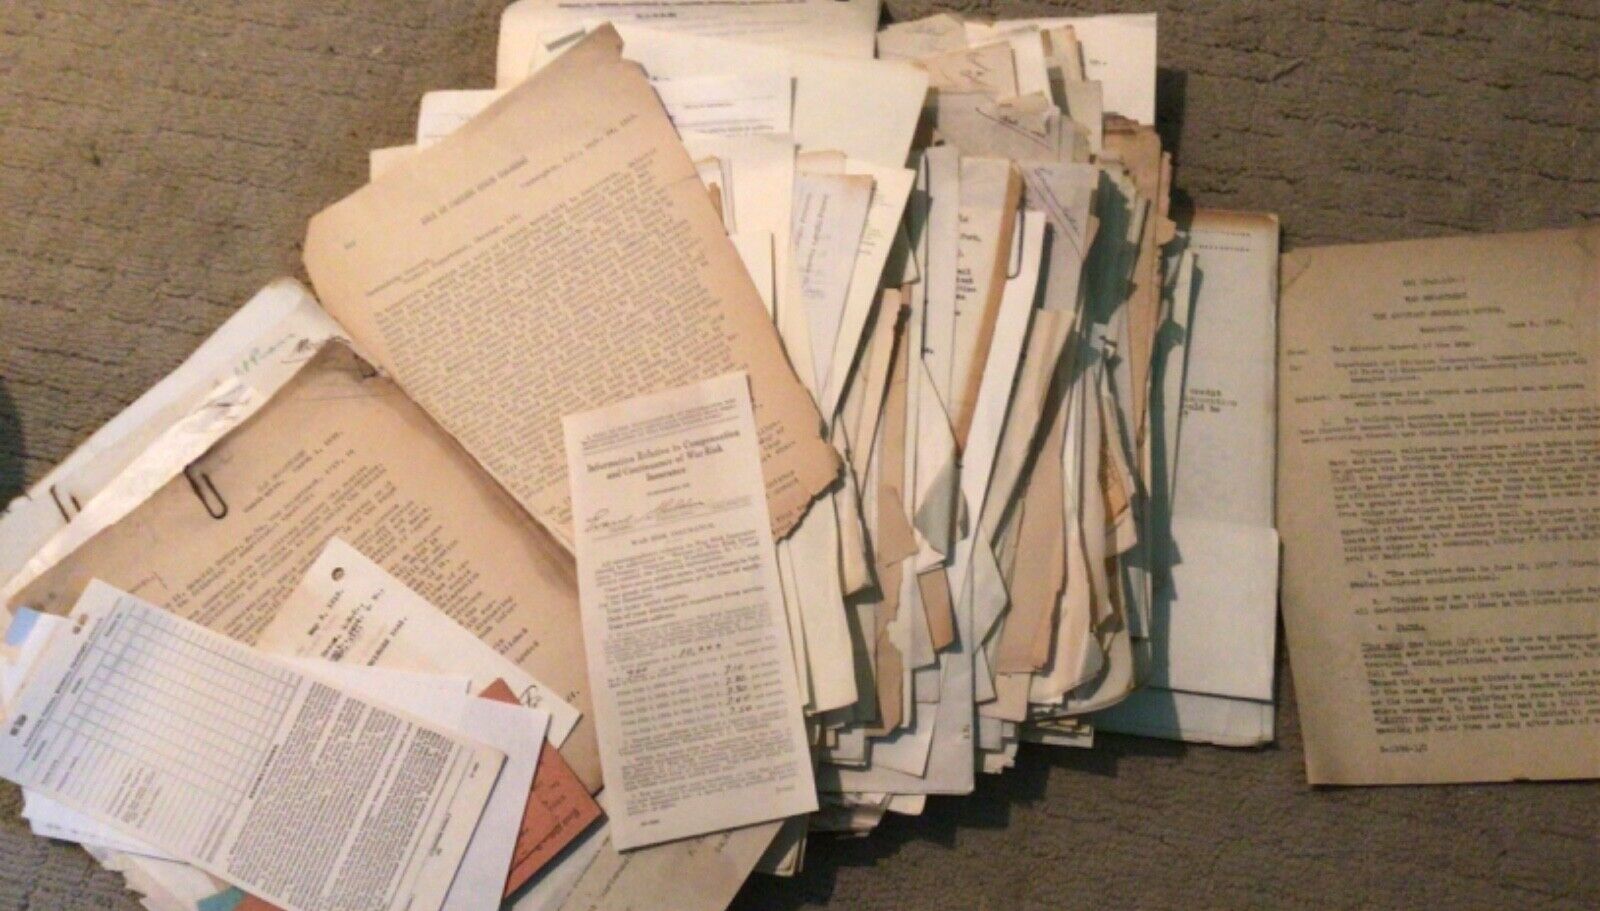 WWI collection of letters/circulars belonging to Capt. Evans QMC, war dept, pay